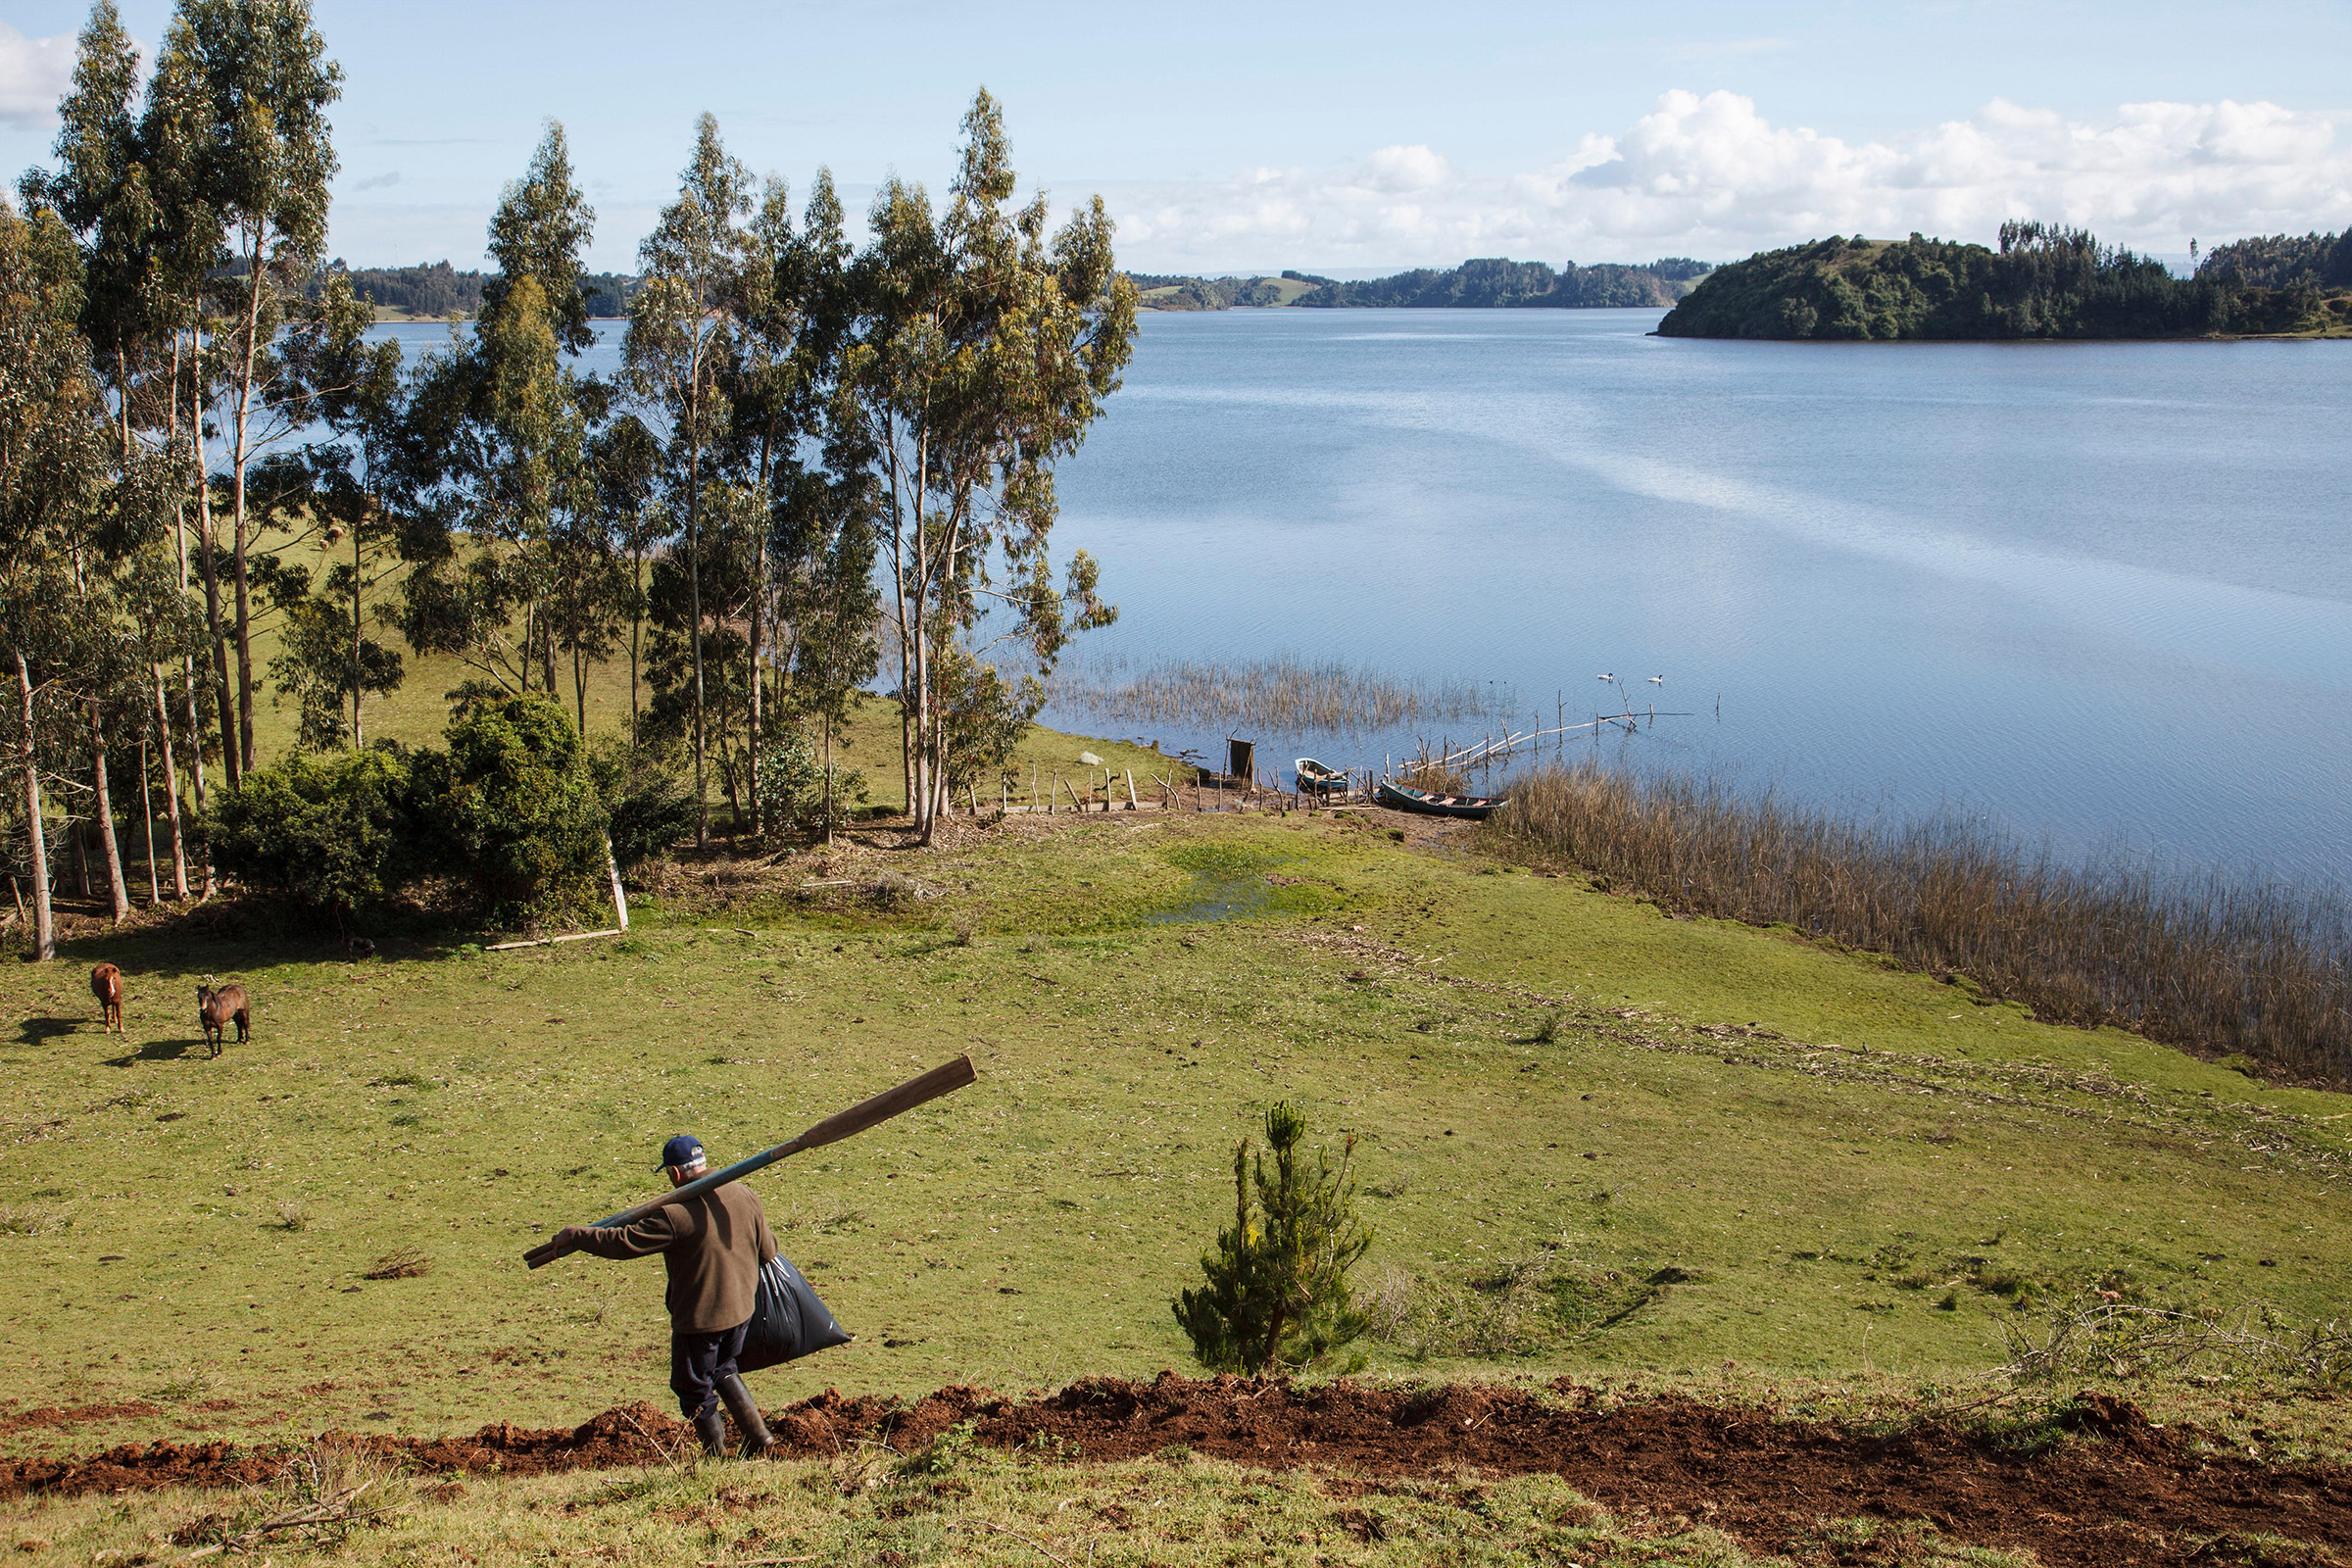 Chile is rewriting its constitution, and Loncon wants the new document to reflect Indigenous thinking on how to coexist with the natural world (Jutta Ulmer—Mauritius Images GmbH/Alamy)